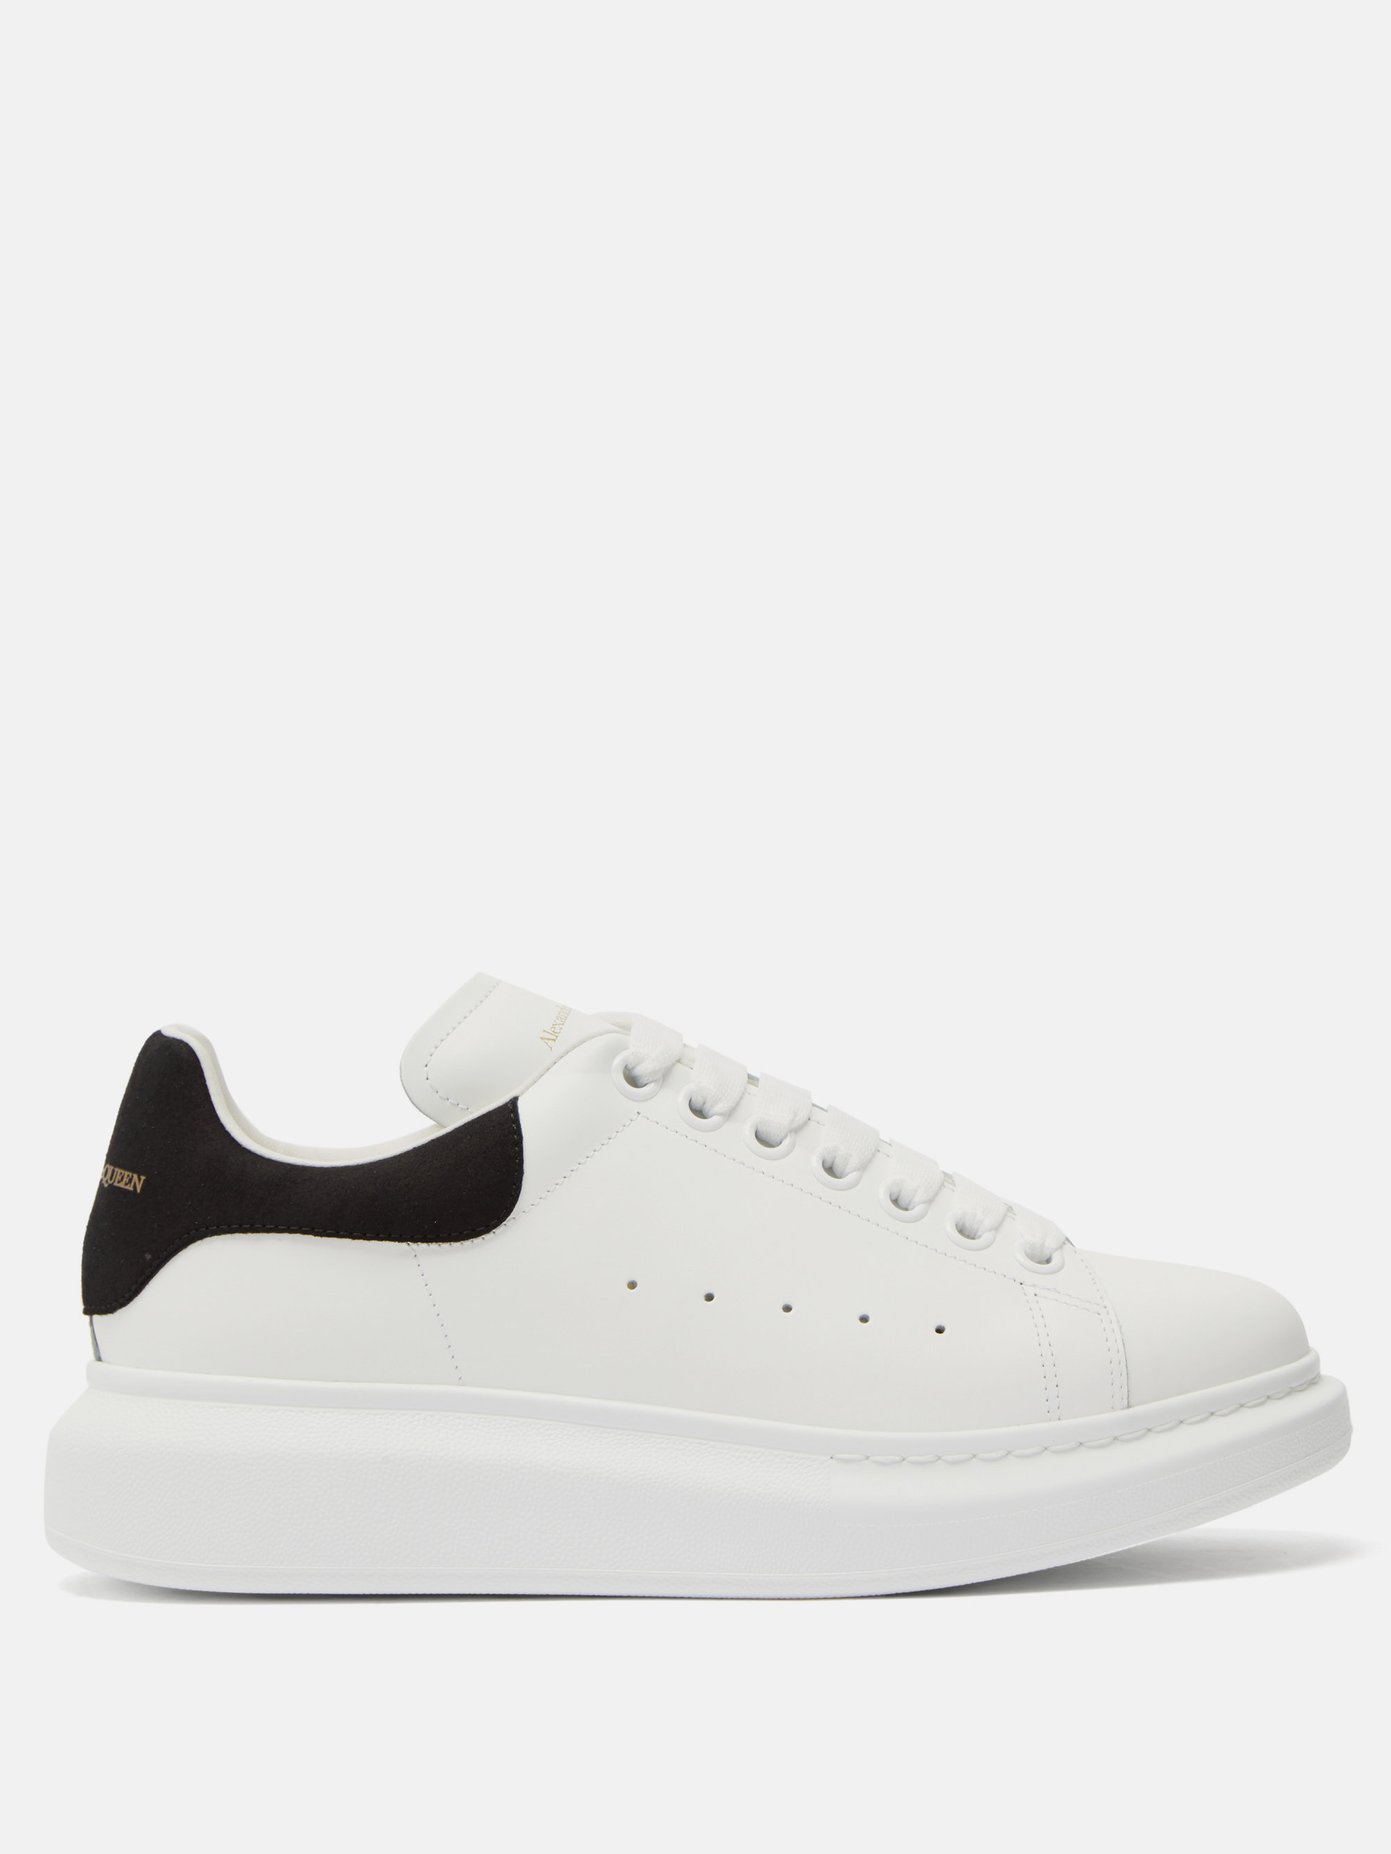 alexander mcqueen shoes all white